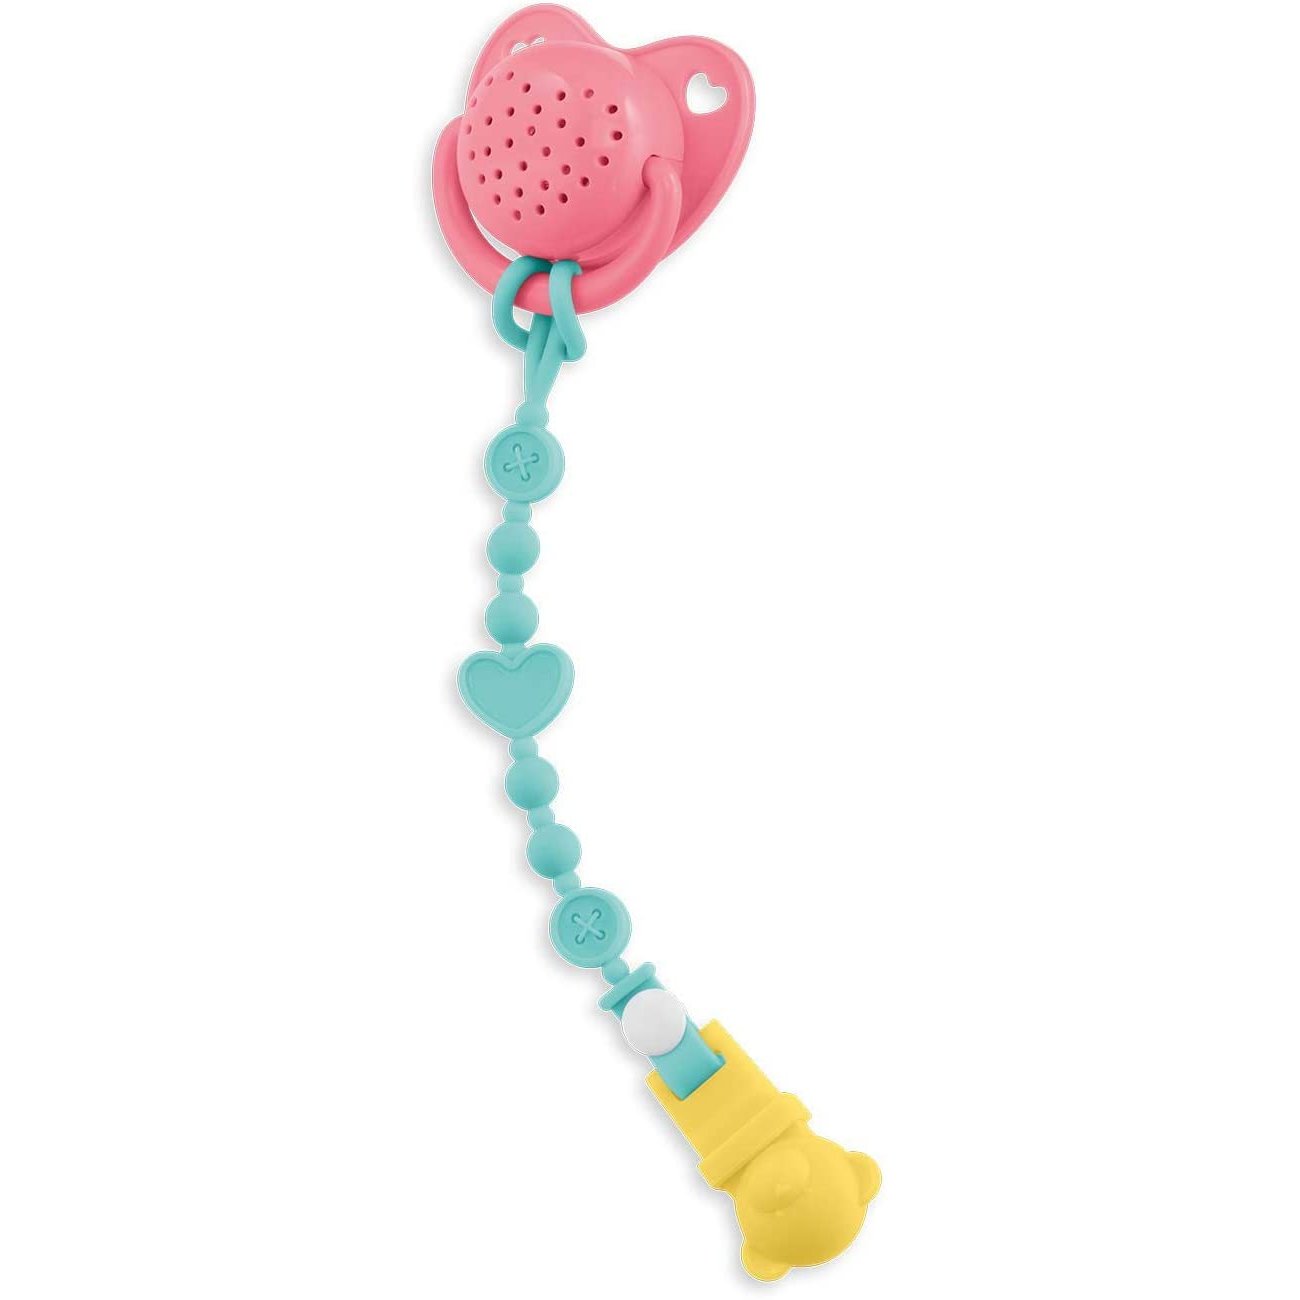 Corolle - Pacifier with 15 Sounds - For 14" Baby Dolls, Pink/Blue-COROLLE-Little Giant Kidz